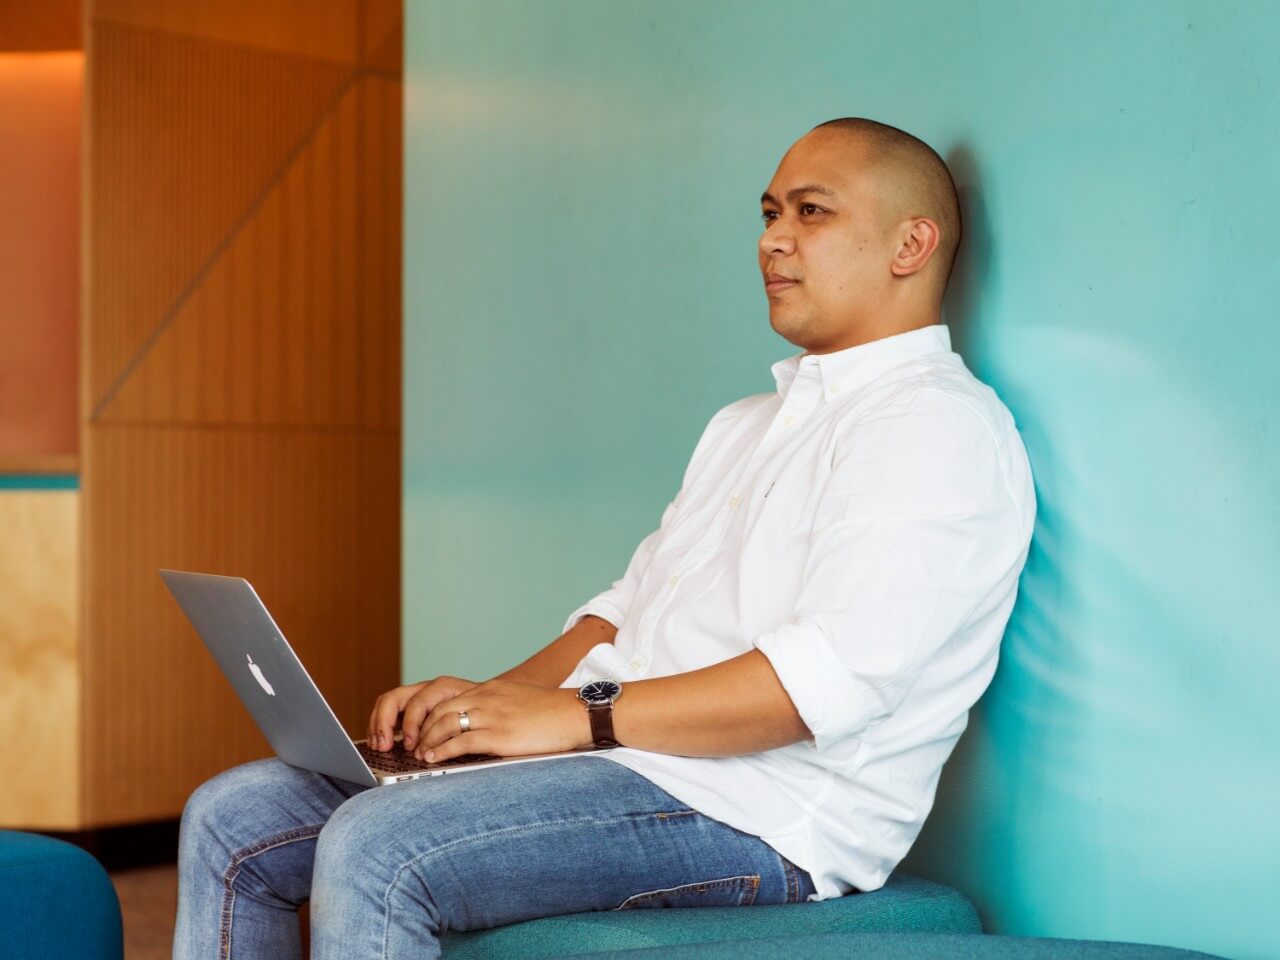 Postgraduate student sitting with a laptop against a wall with a teal background